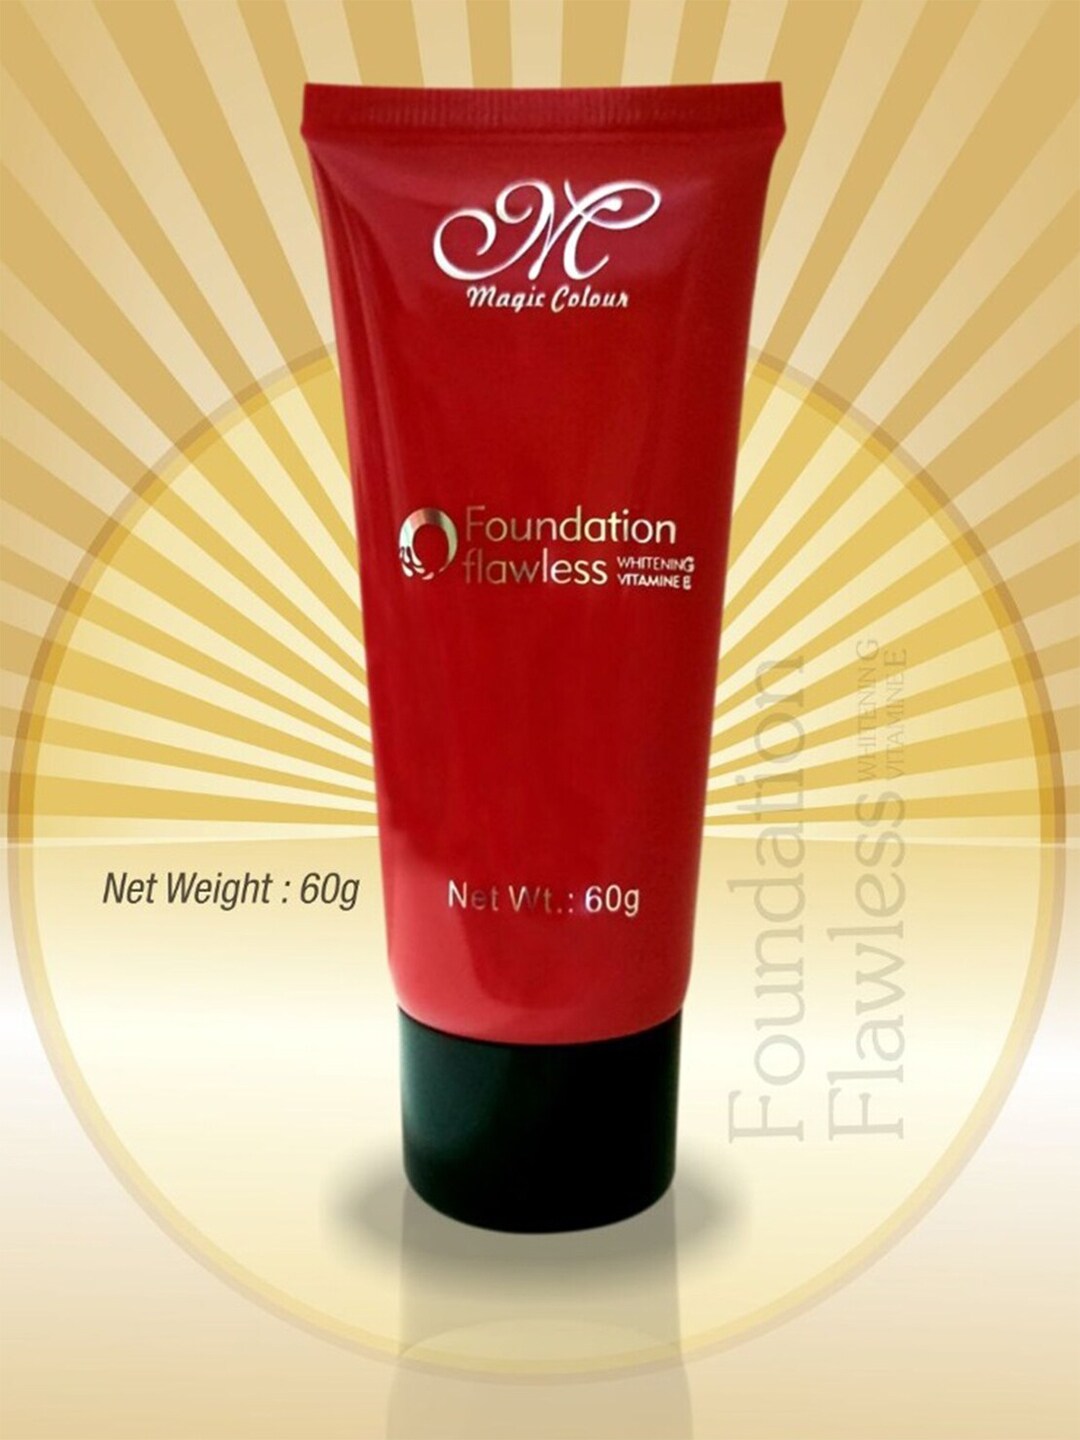 Magic Colour Foundation Flawless Whitening with Vitamin E 60g - Ivory Price in India